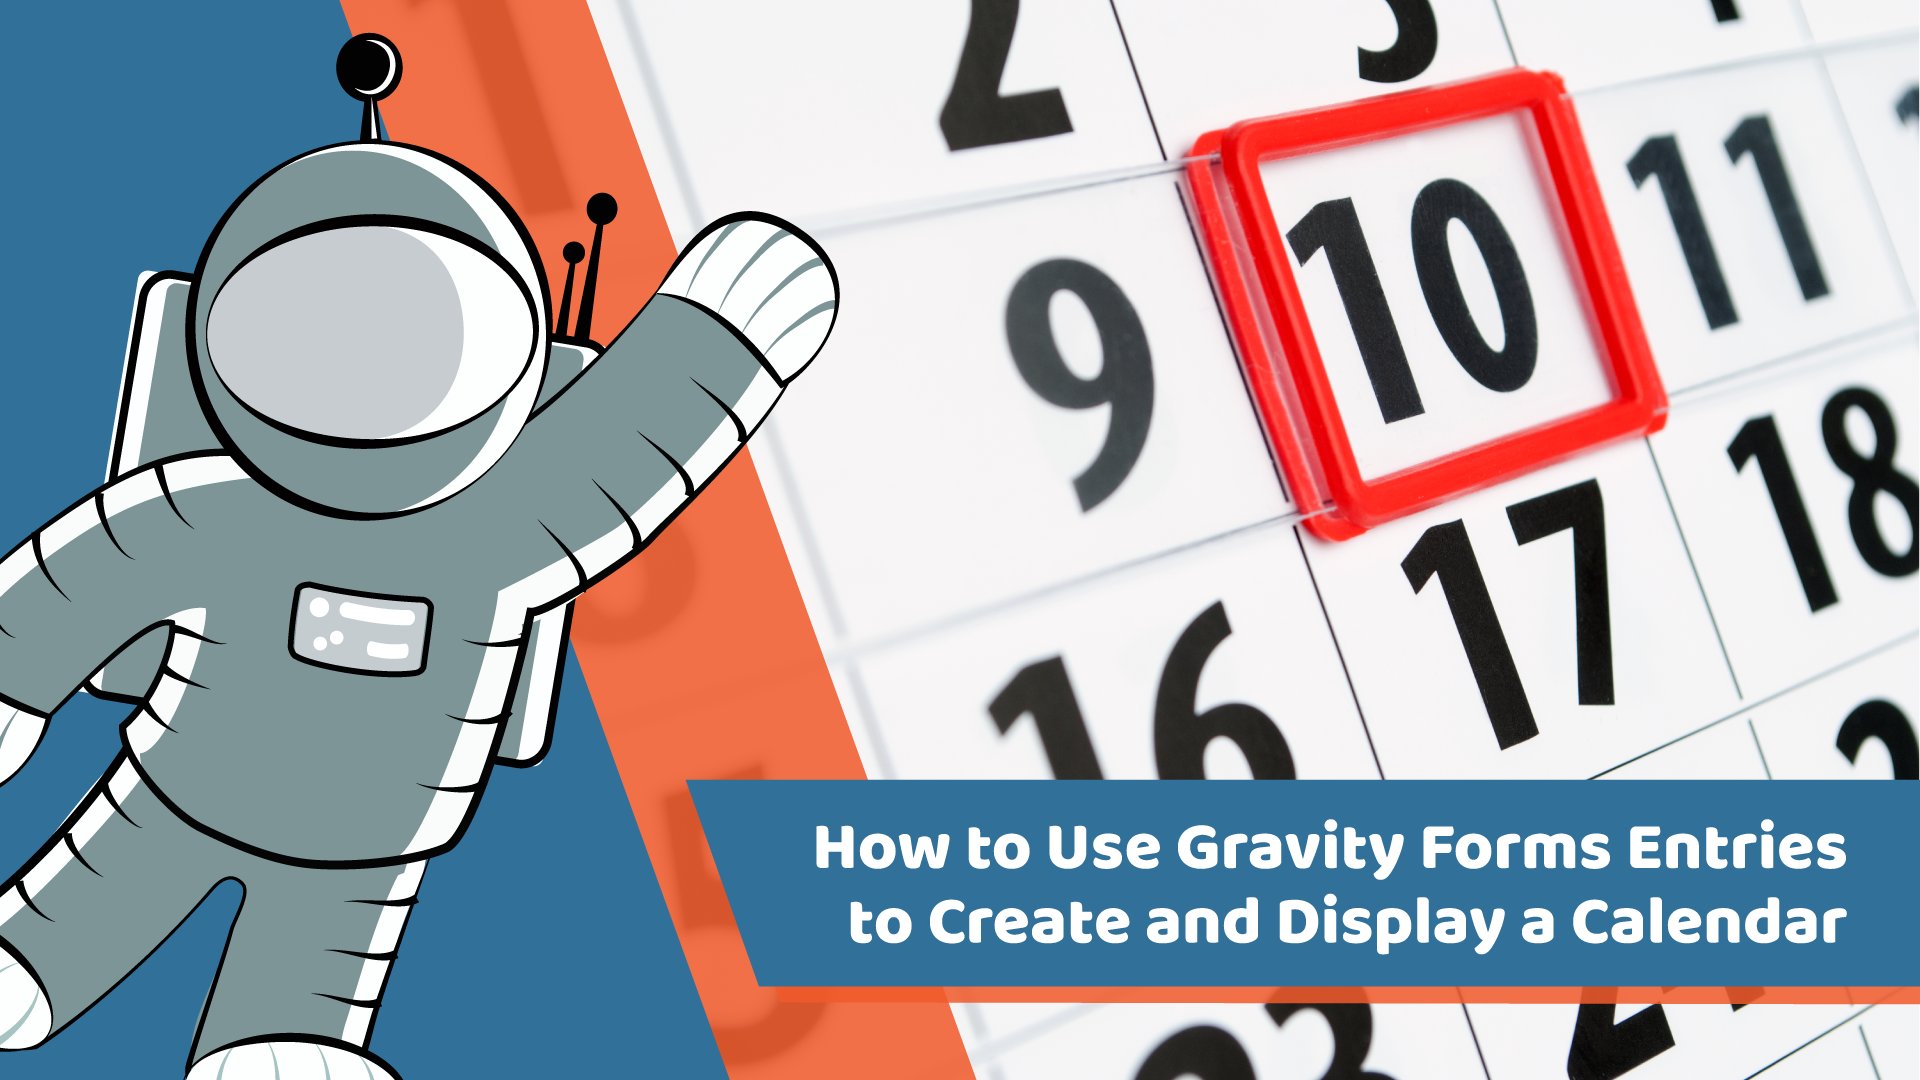 How to Use Gravity Forms Entries to Create and Display a Calendar